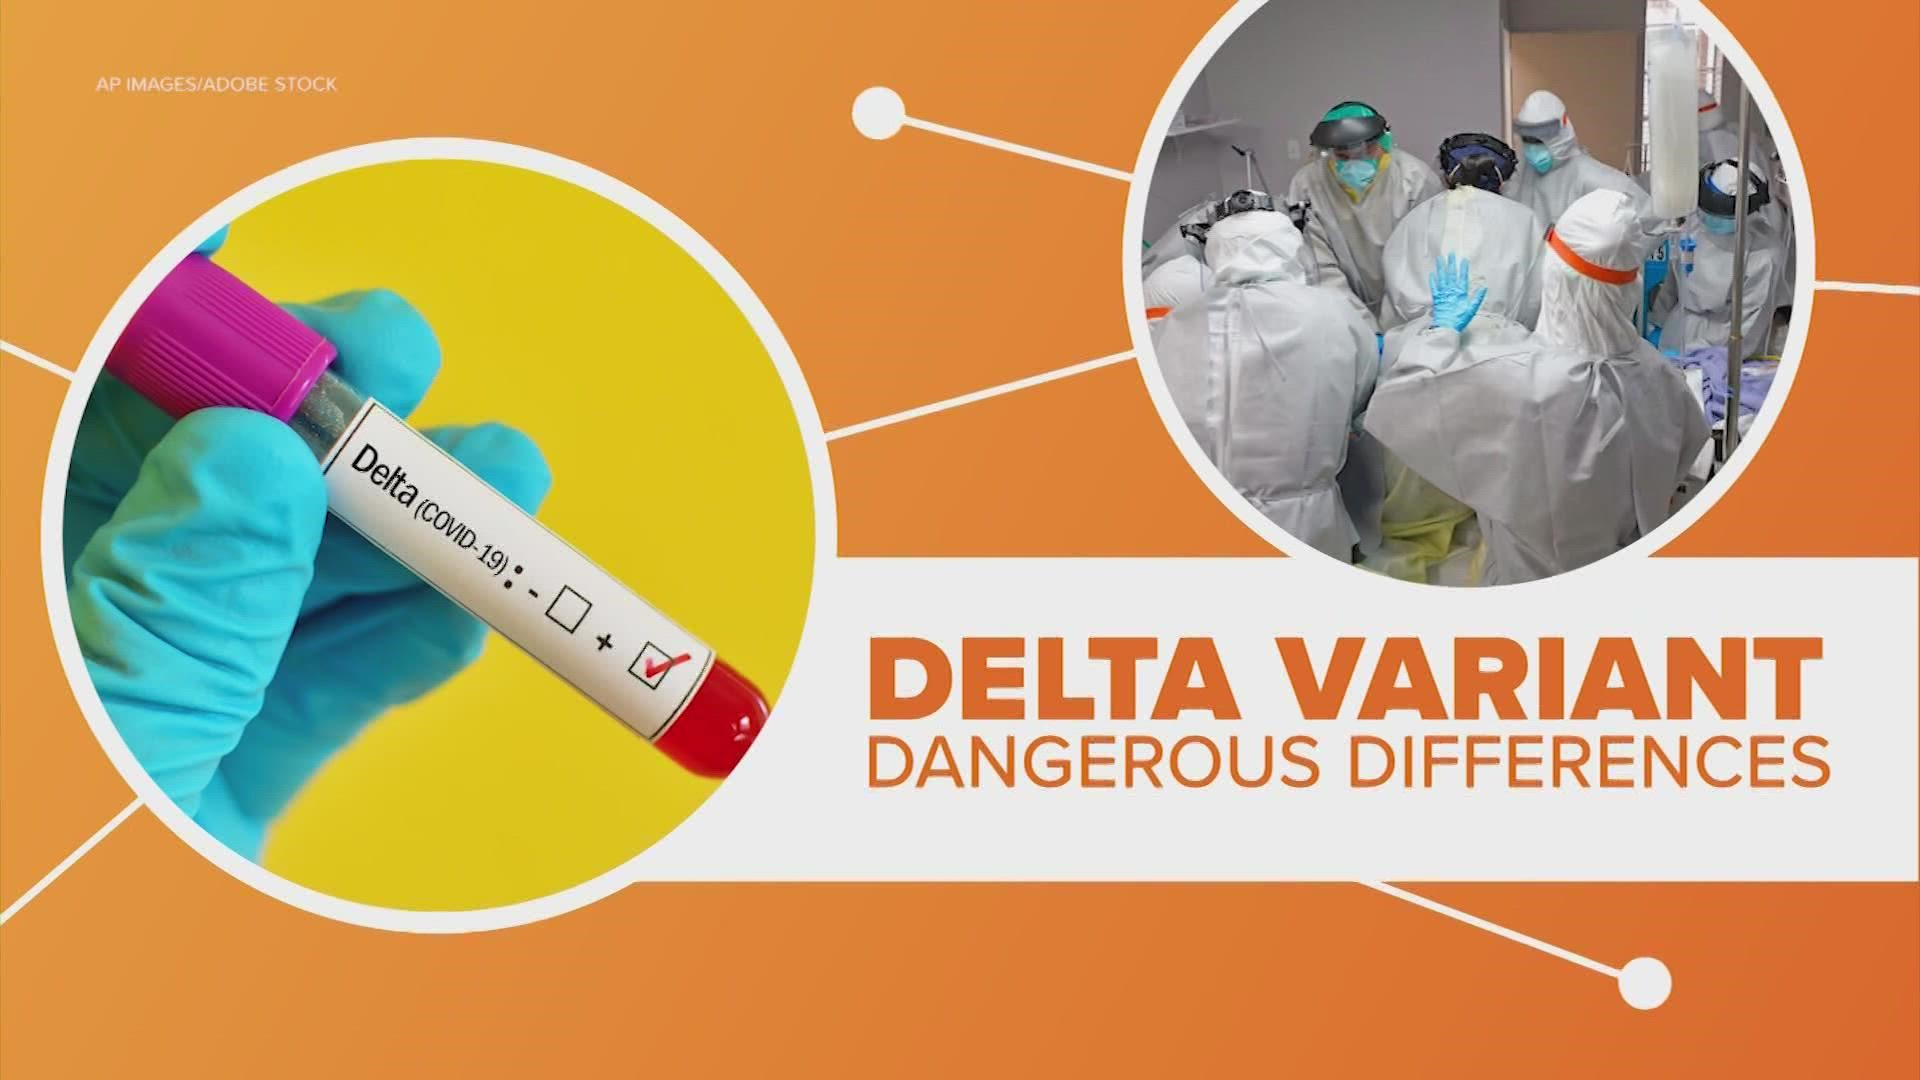 The Delta variant continues to race across the U.S., but what makes this COVID mutation more dangerous? Let’s connect the dots.